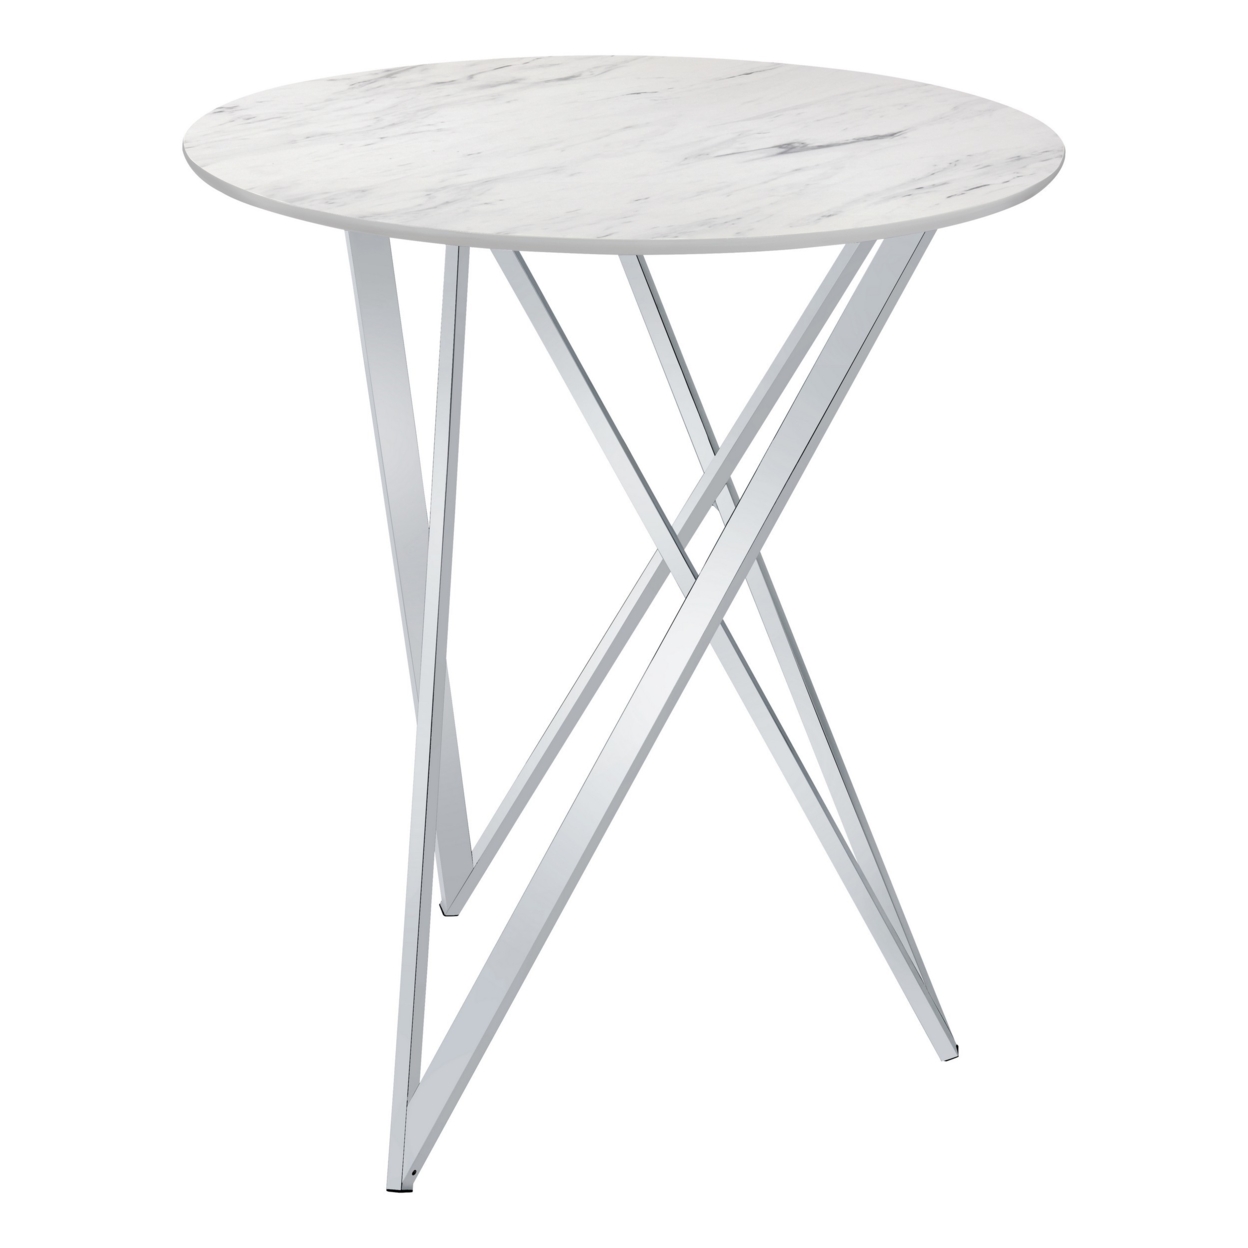 43 Inch Tall Bar Table, White Round Top, Art Deco Style Faux Marble Surface- Saltoro Sherpi